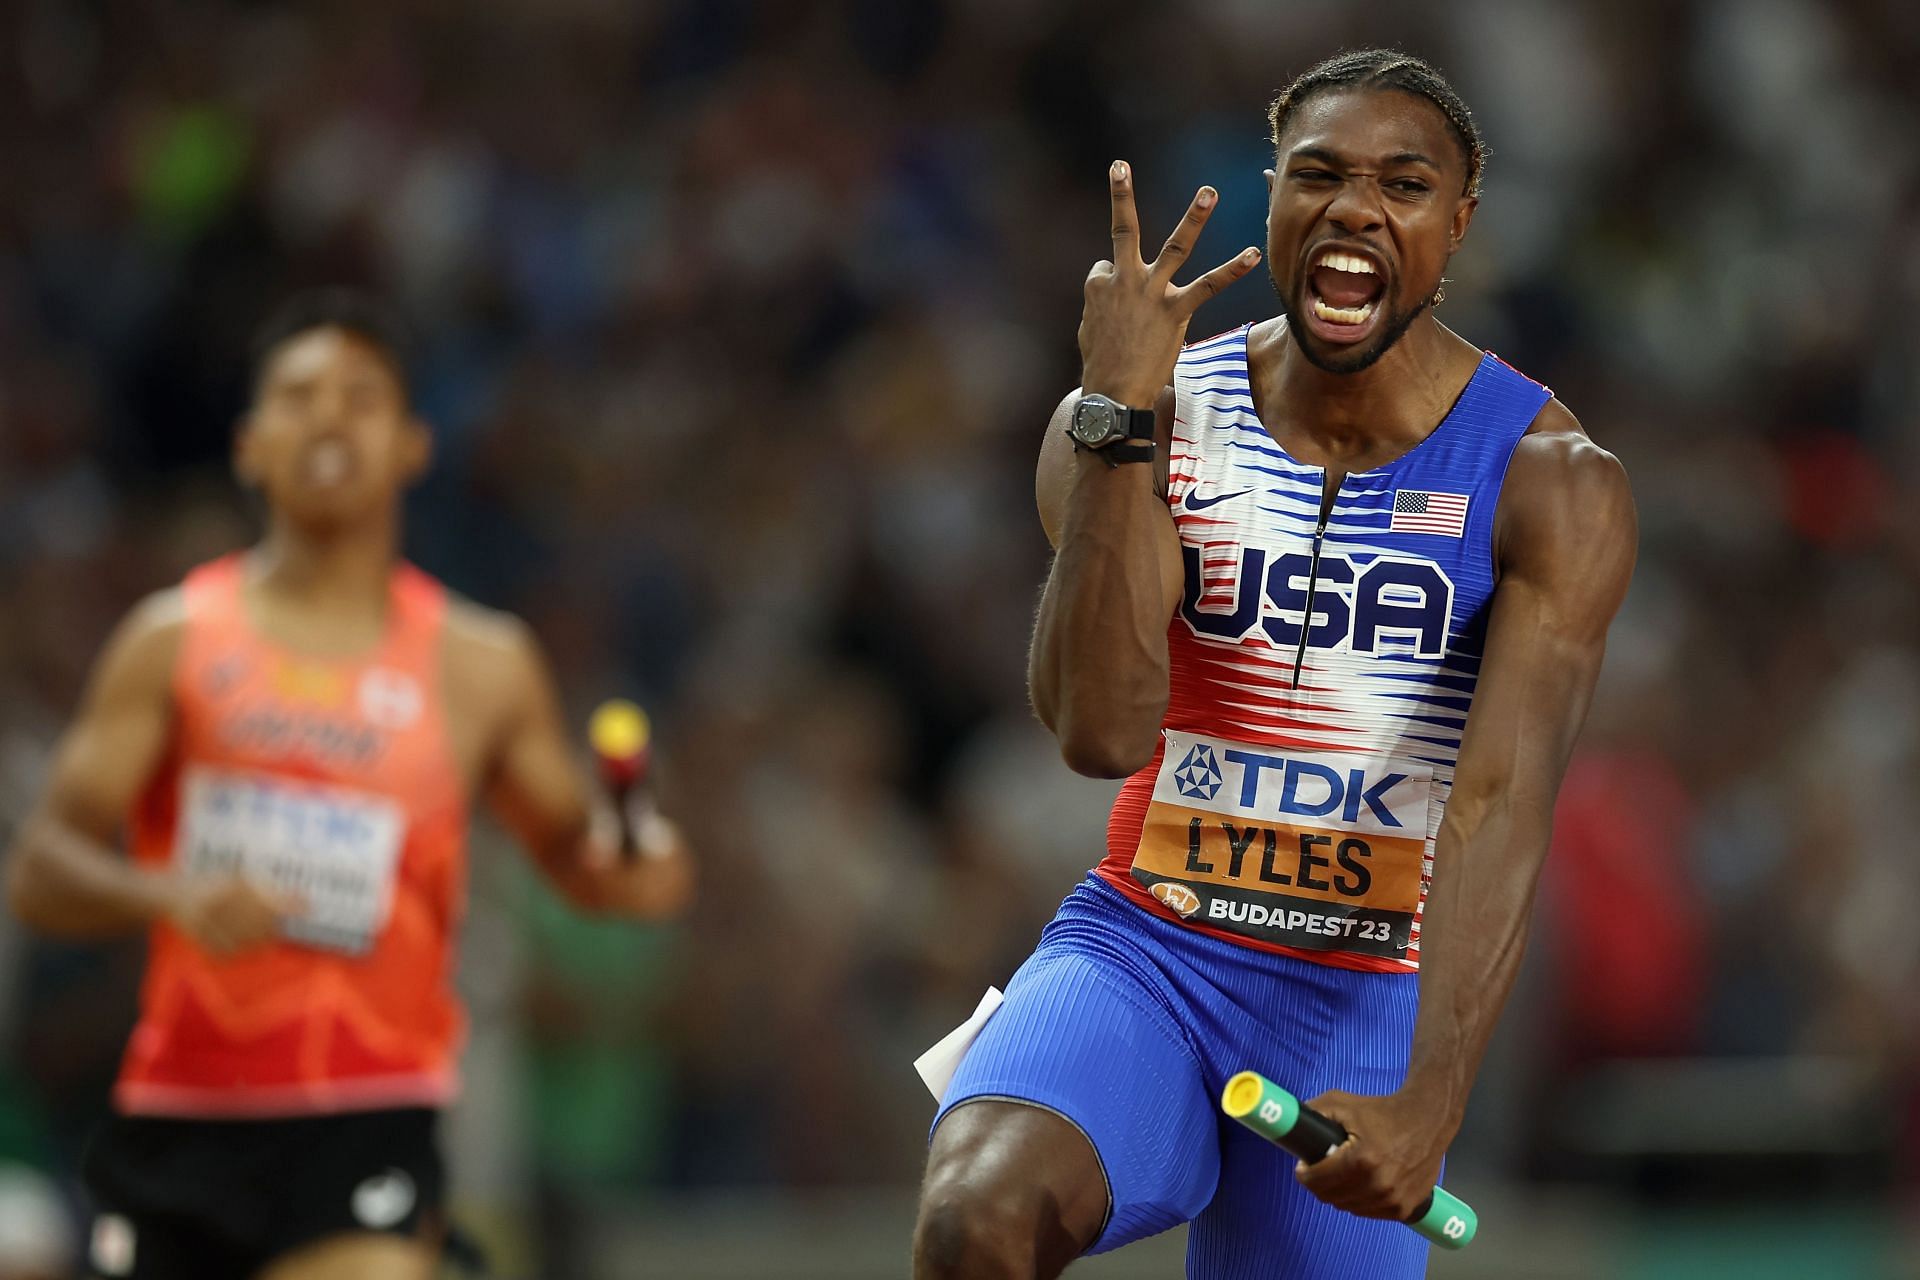 Noah Lyles celebrates after winning the men&#039;s 4x100m relay at the 2023 World Athletics Championships in Budapest